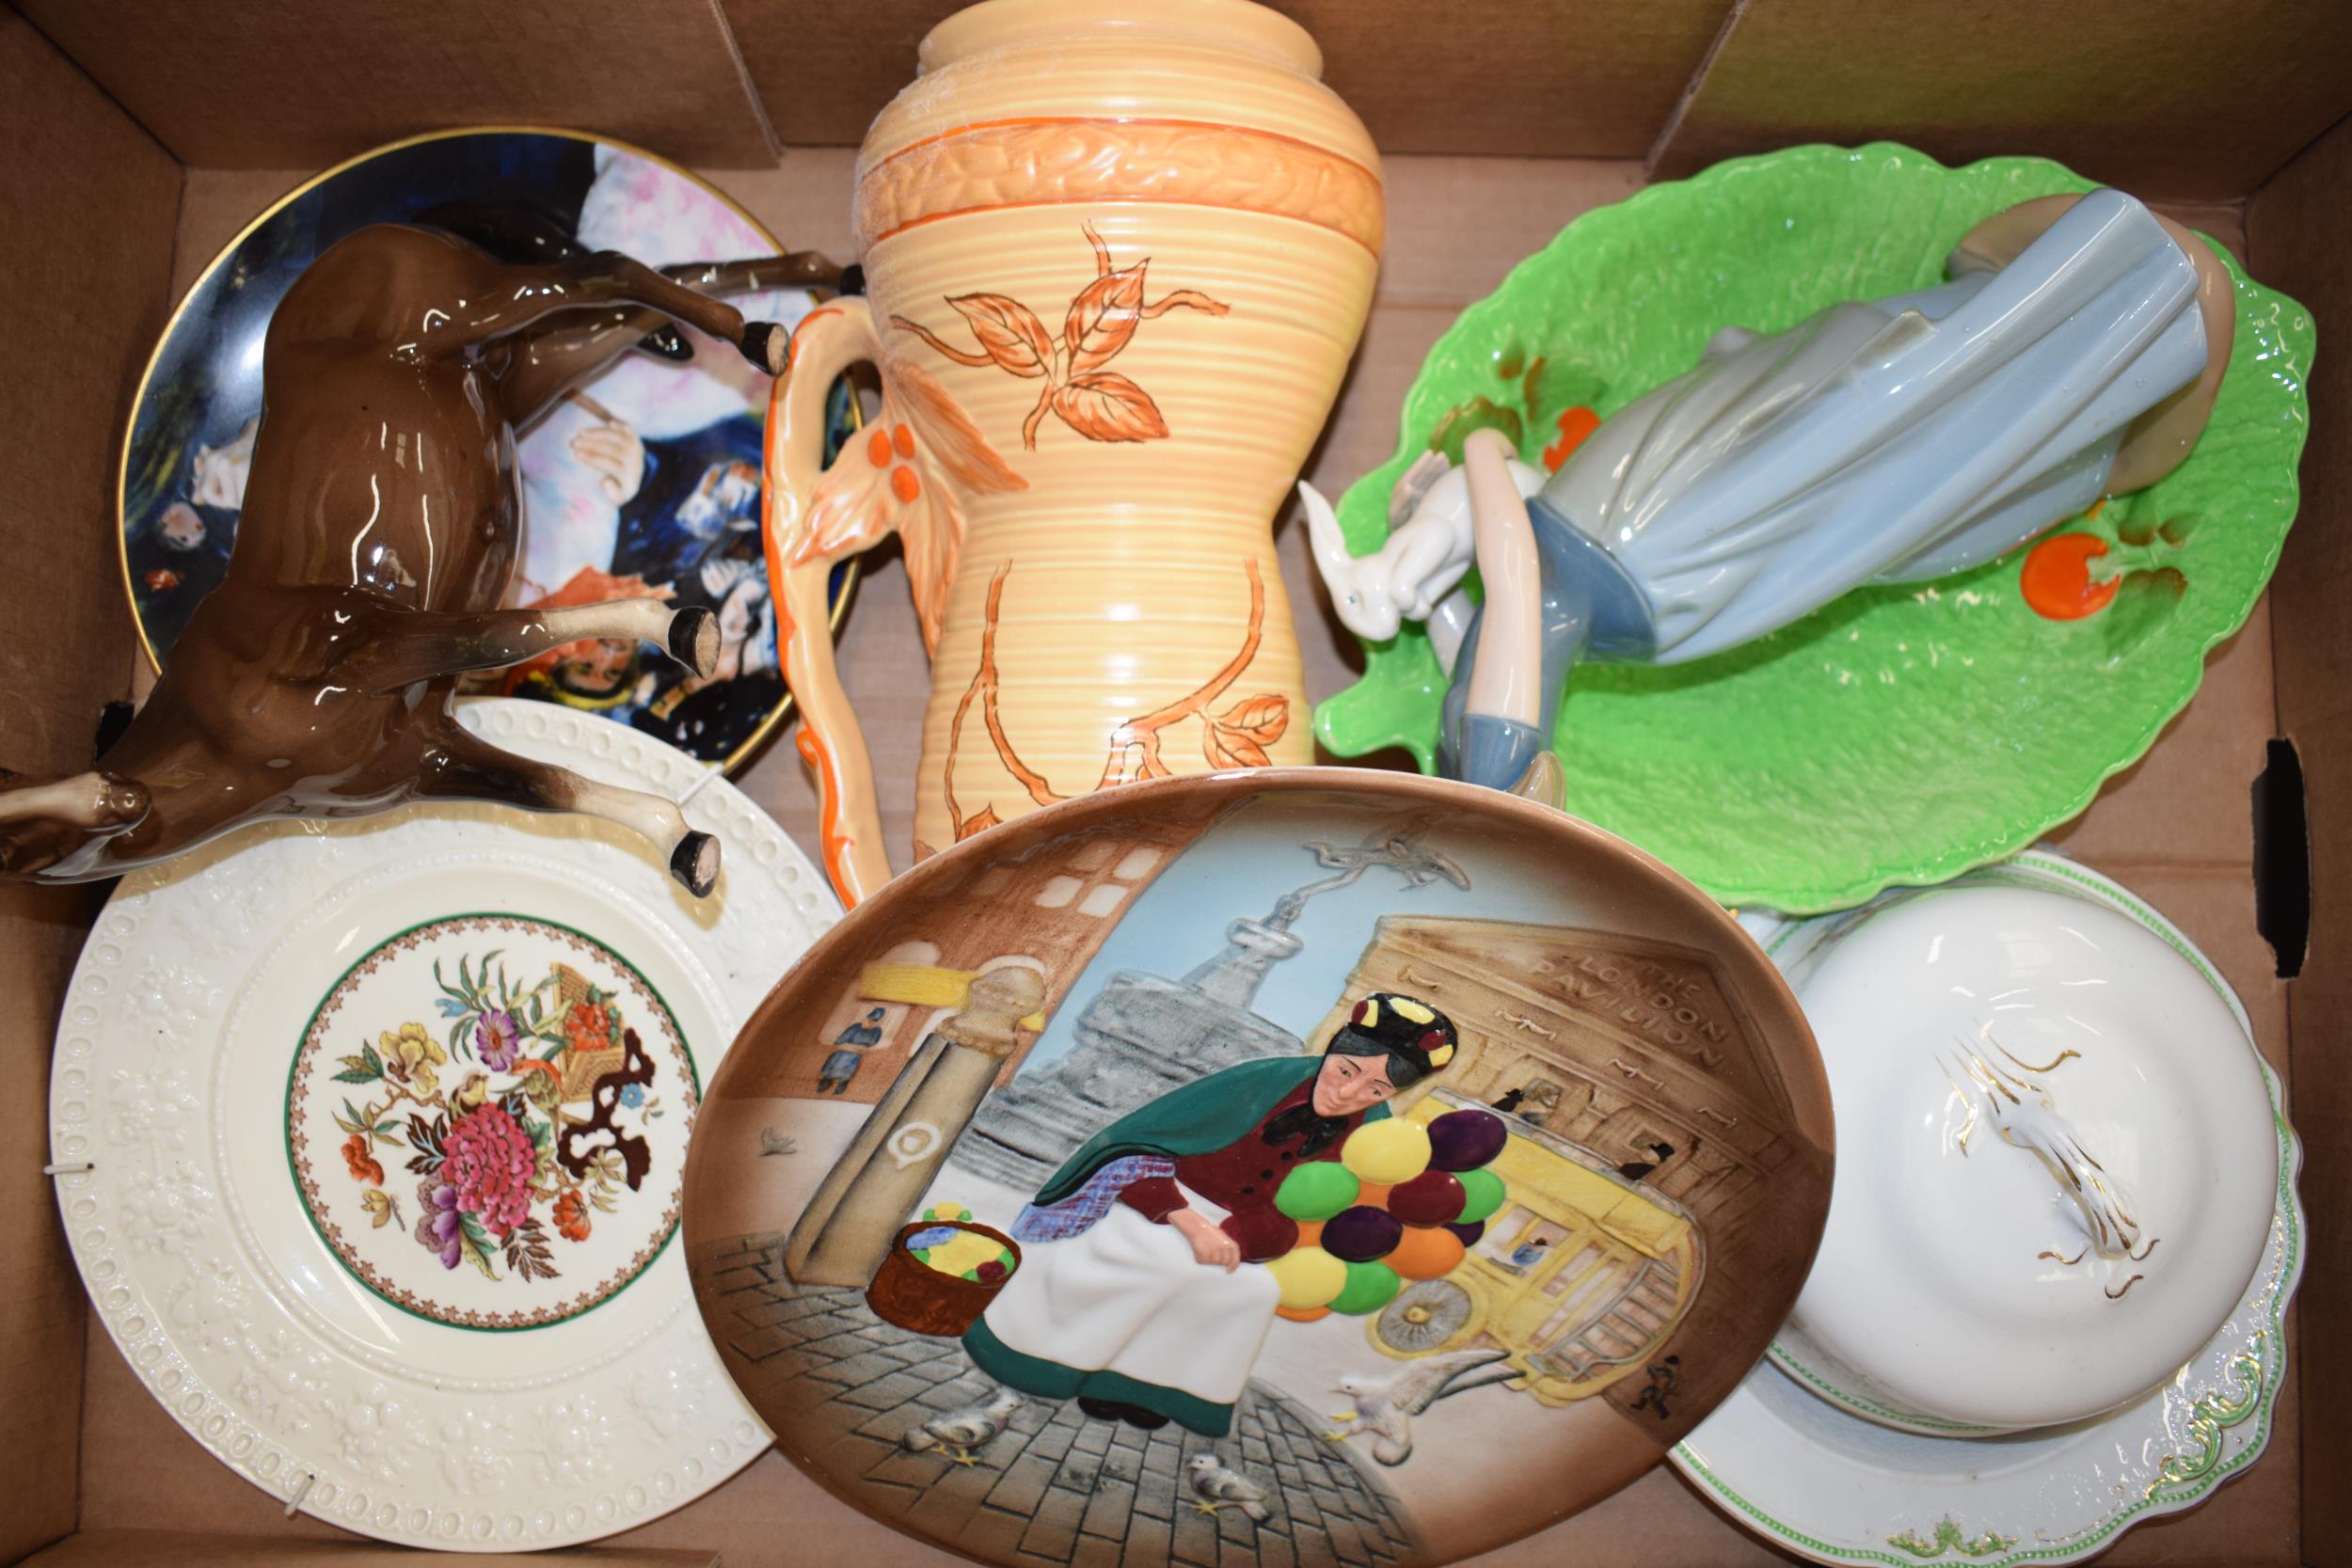 Pottery to include a Beswick horse (af), a Doulton Balloon Seller embossed plate, a Nao figure (